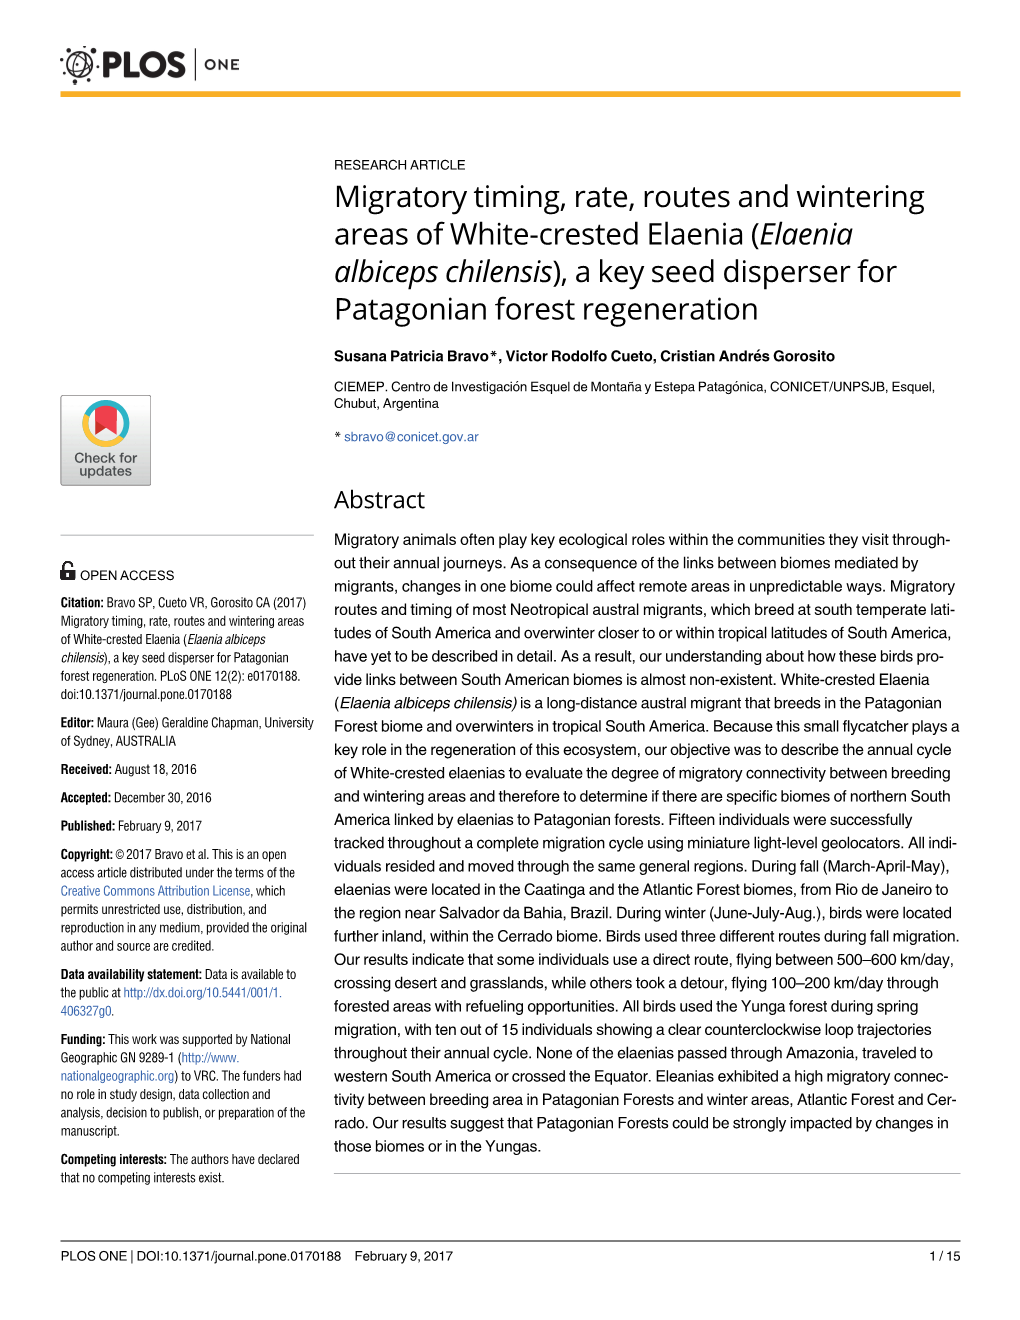 Migratory Timing, Rate, Routes and Wintering Areas of White-Crested Elaenia (Elaenia Albiceps Chilensis), a Key Seed Disperser for Patagonian Forest Regeneration